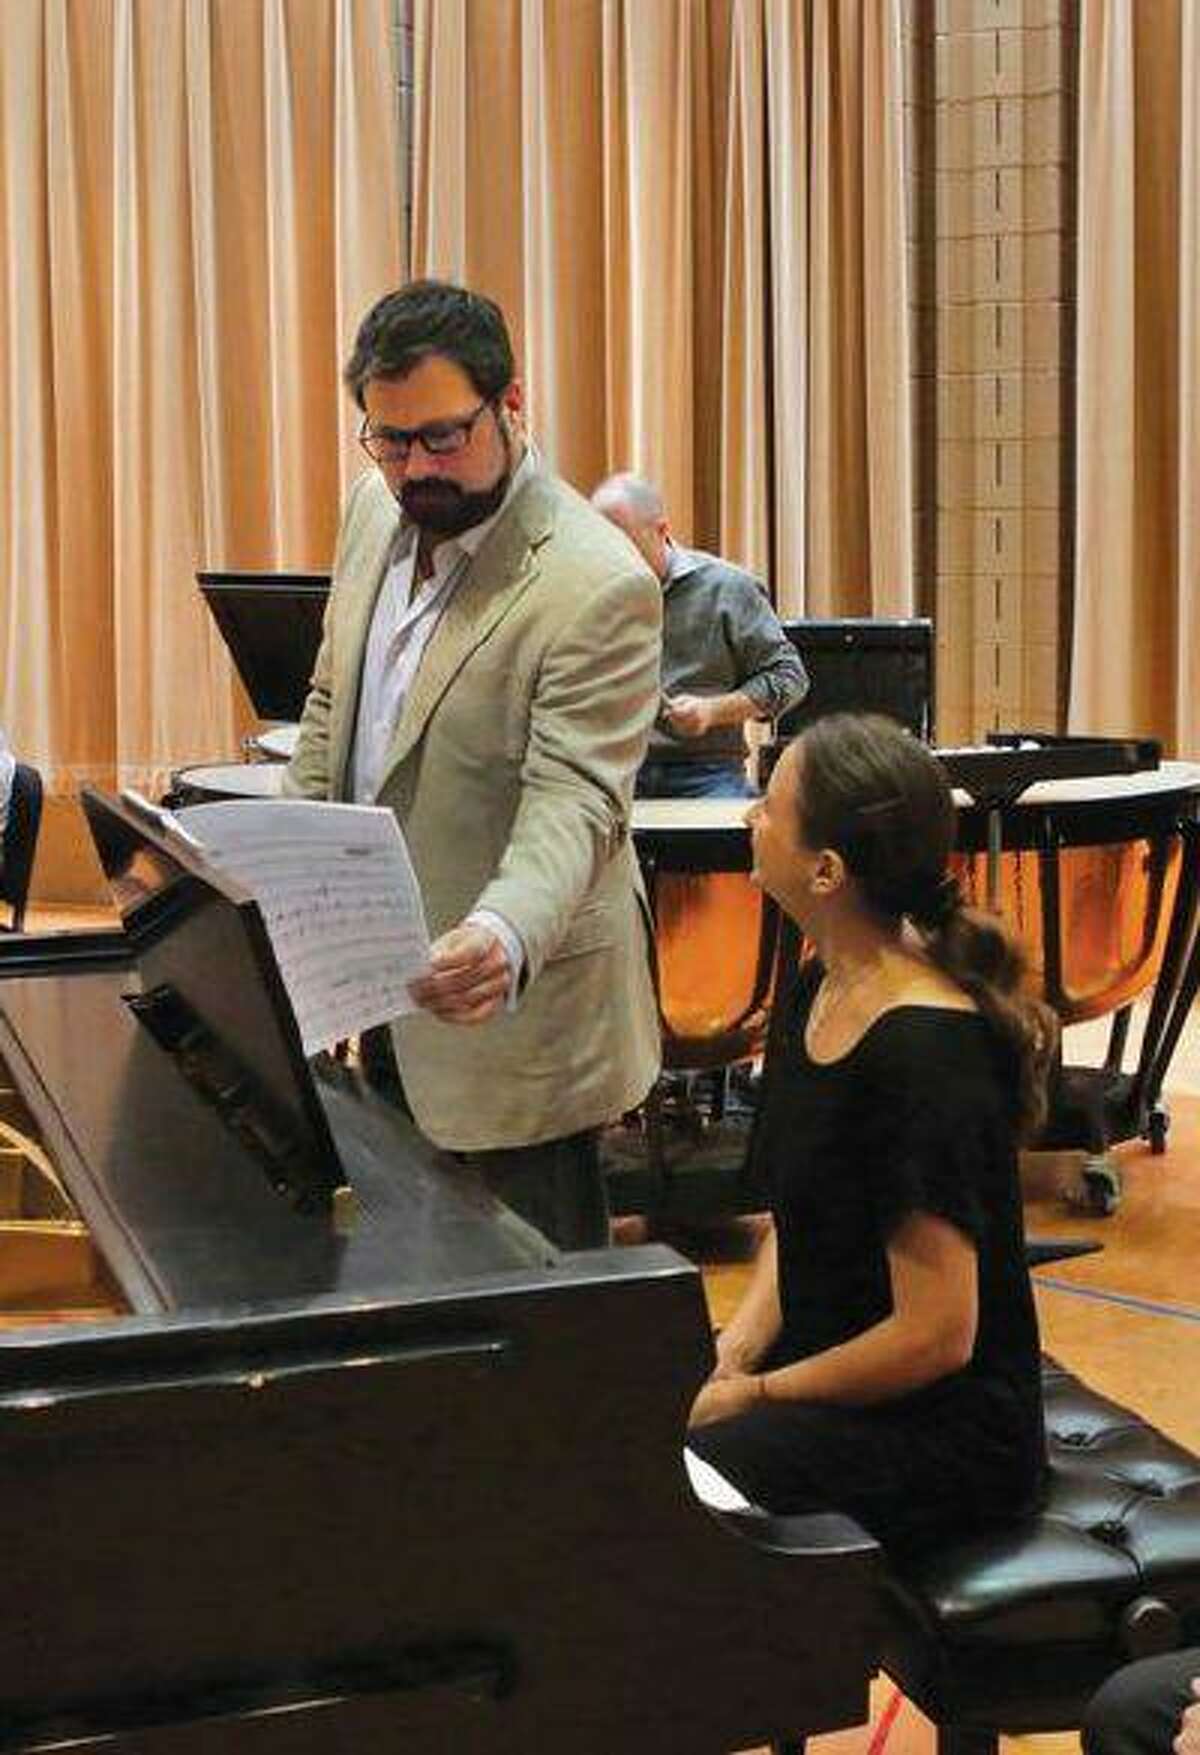 David Daniels with pianist Jeanne-Minette Cilliers in a workshop performance of "Oscar" last summer.